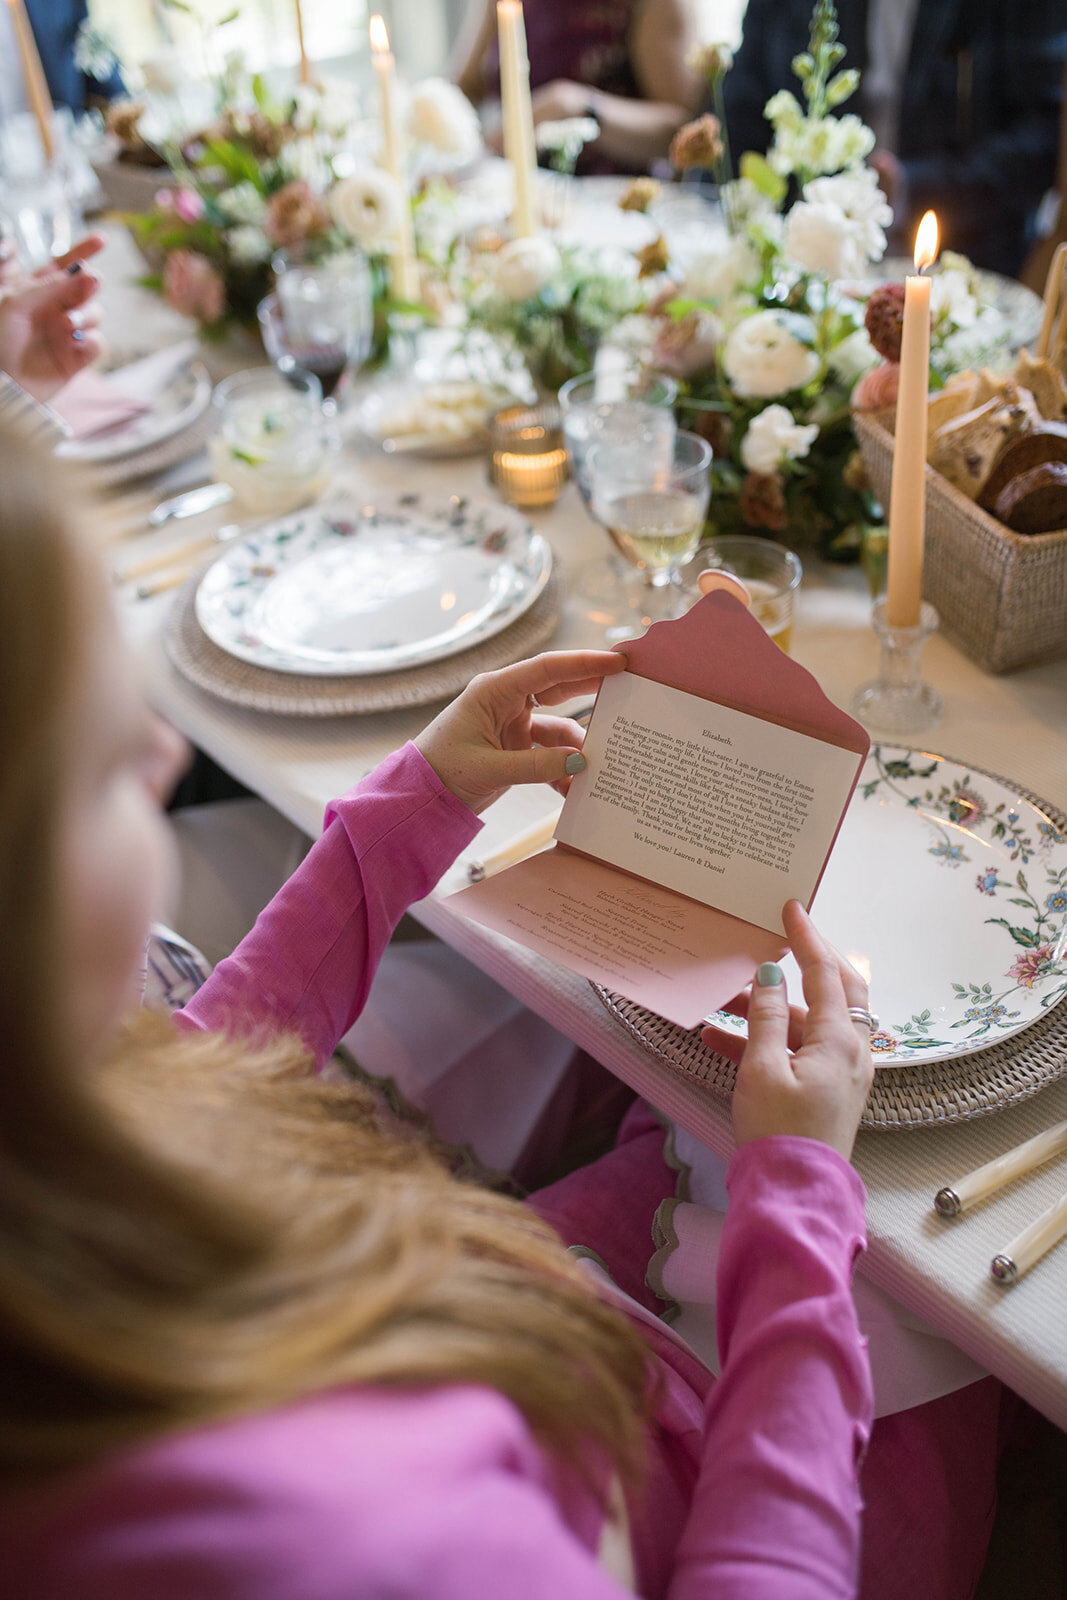 Wedding guest reading personalized table setting note from the bride and groom.